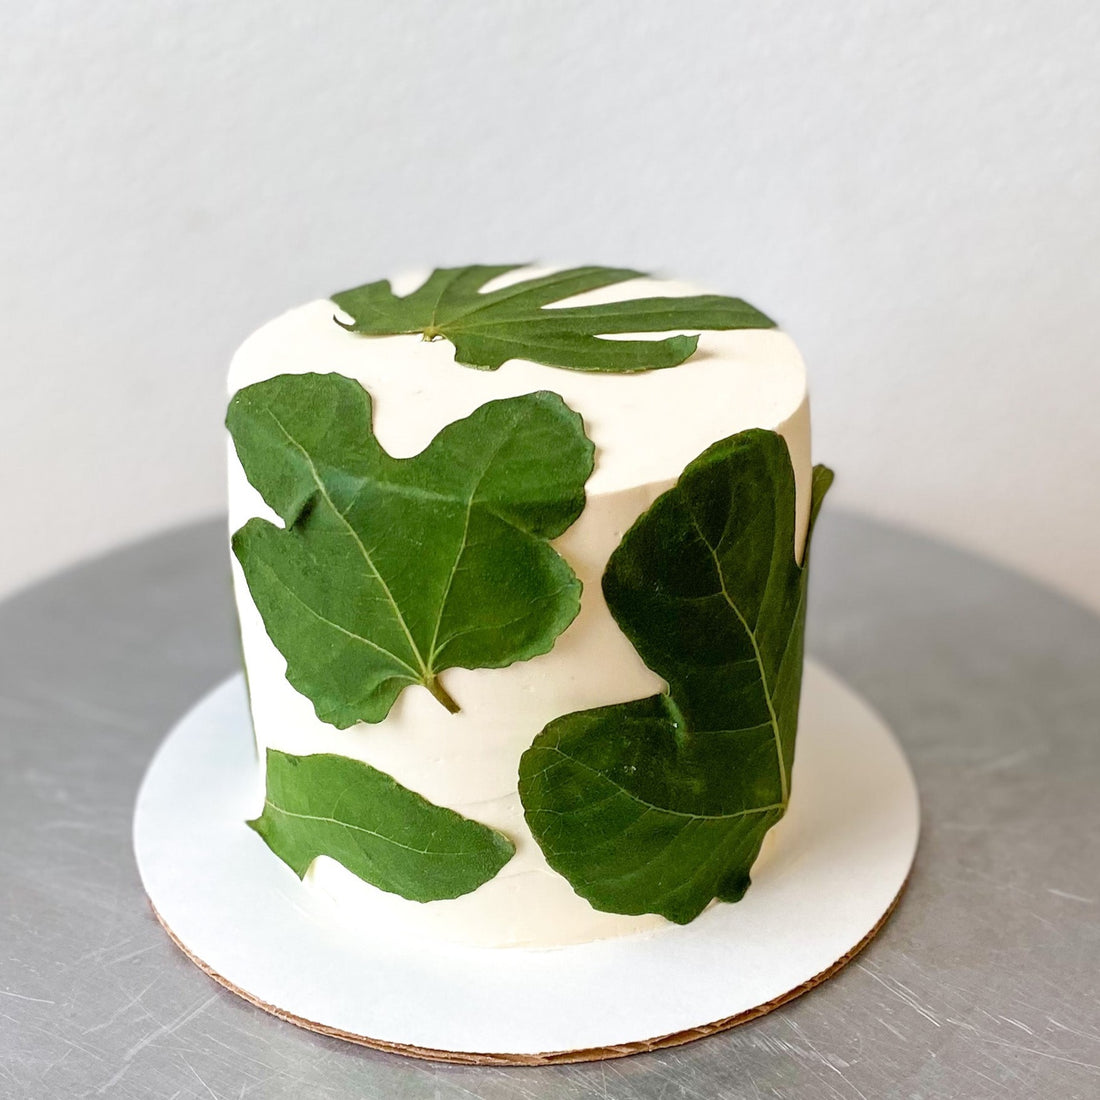 A round cake decorated with pressed fig leaves.